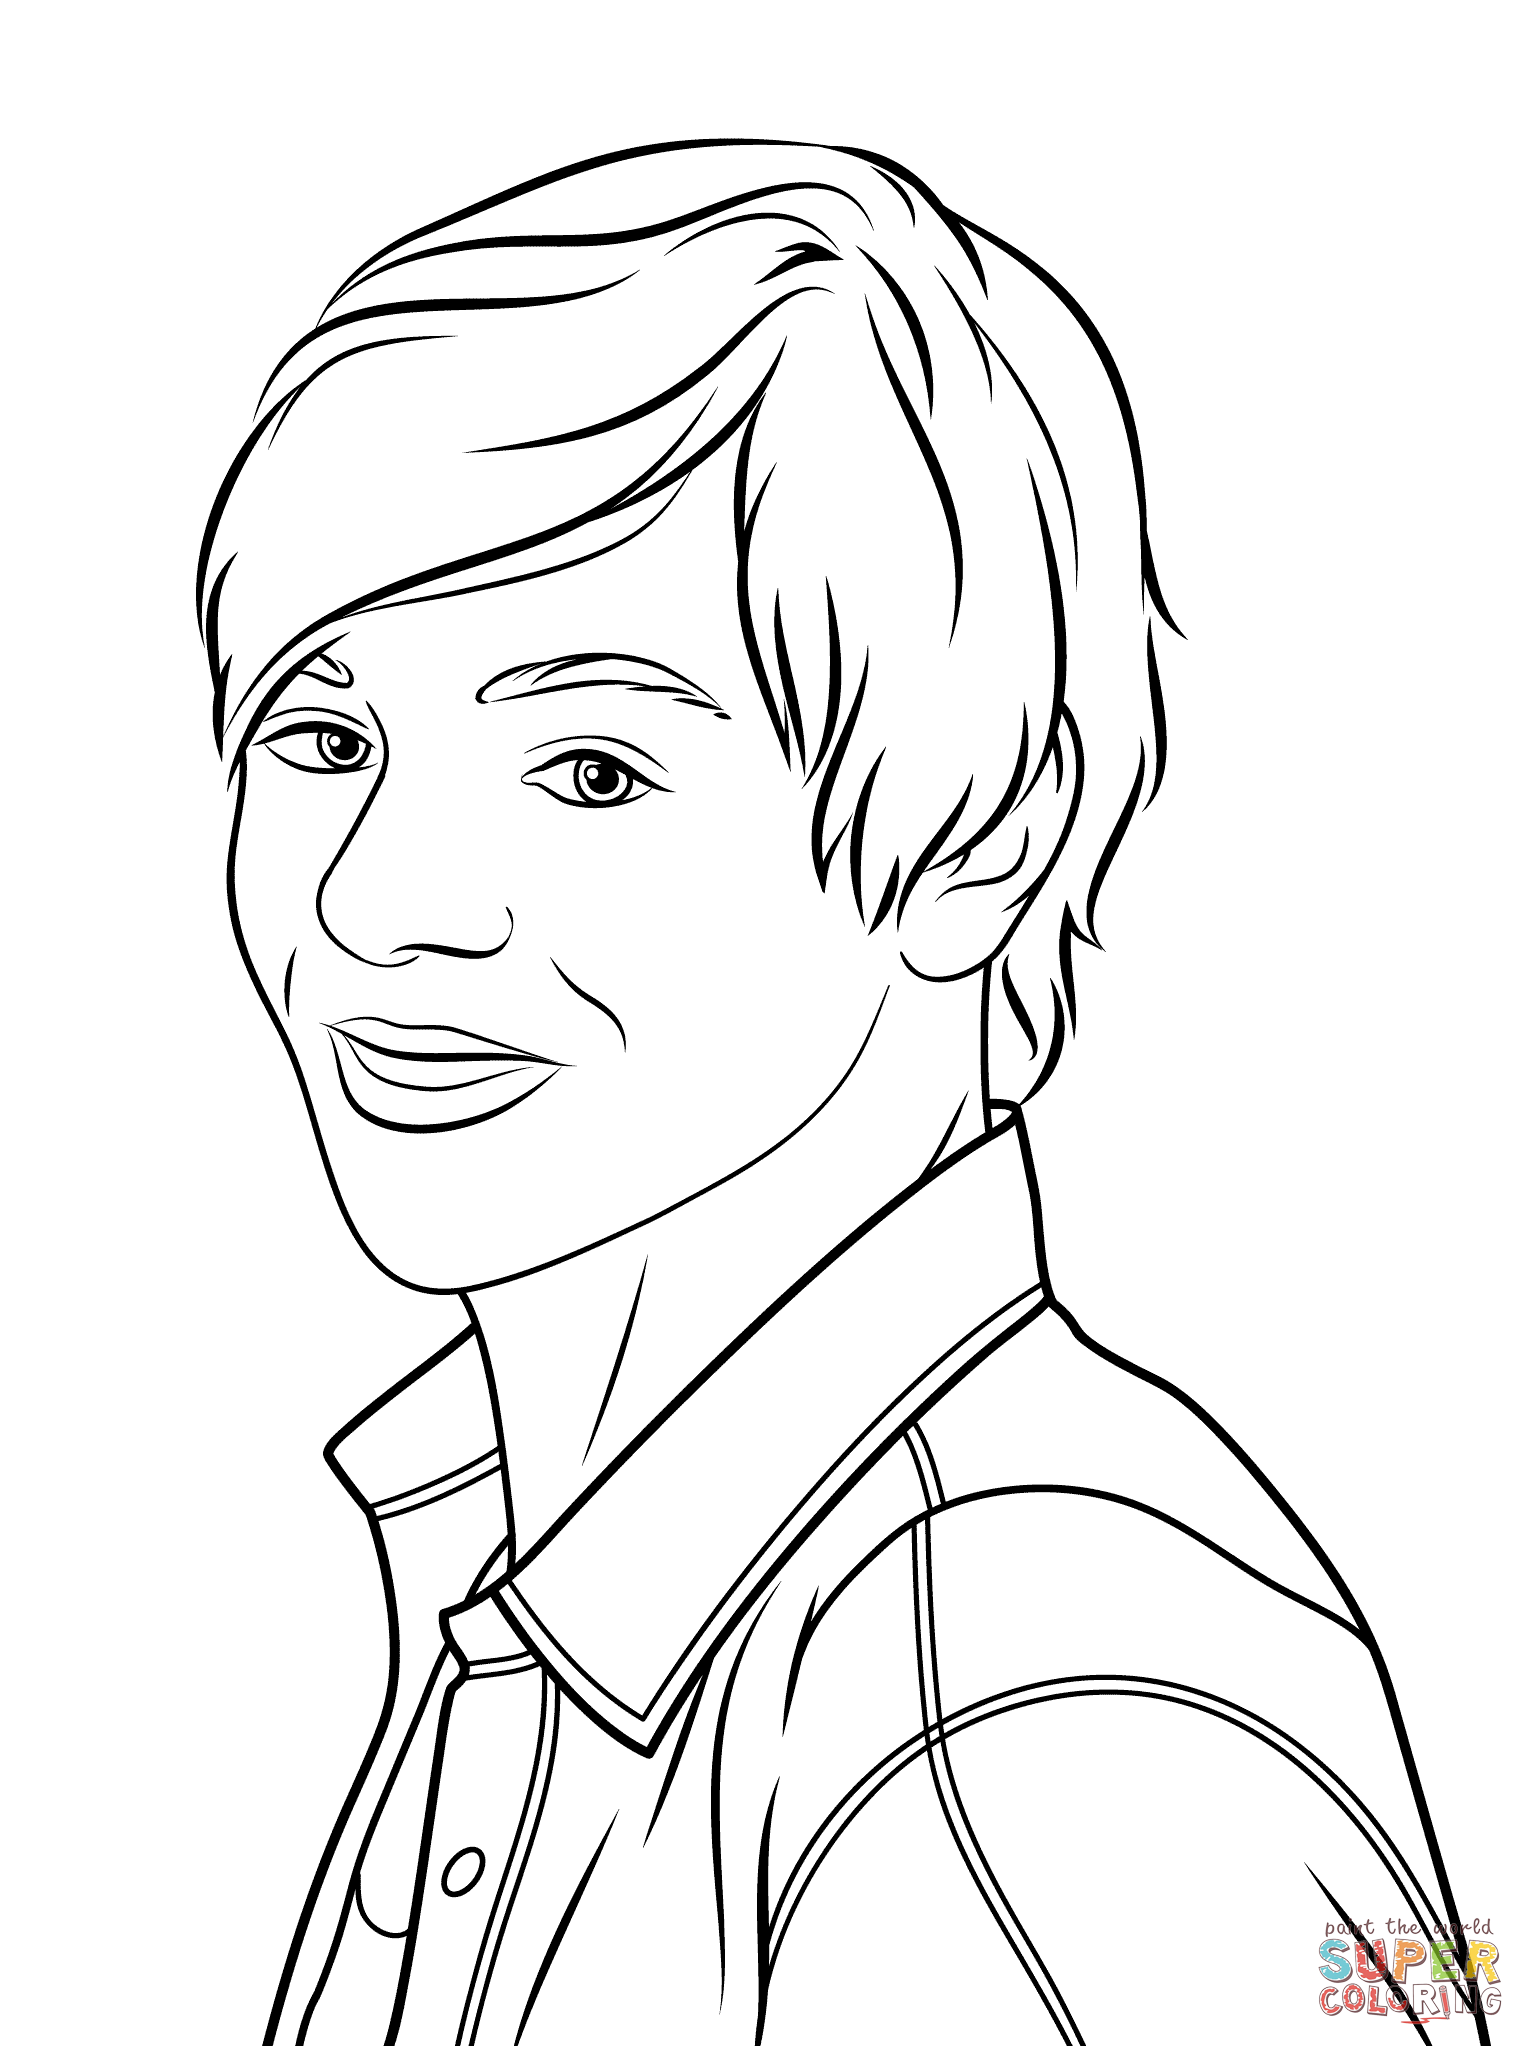 Ross Lynch as Austin Moon coloring page | Free Printable Coloring Pages